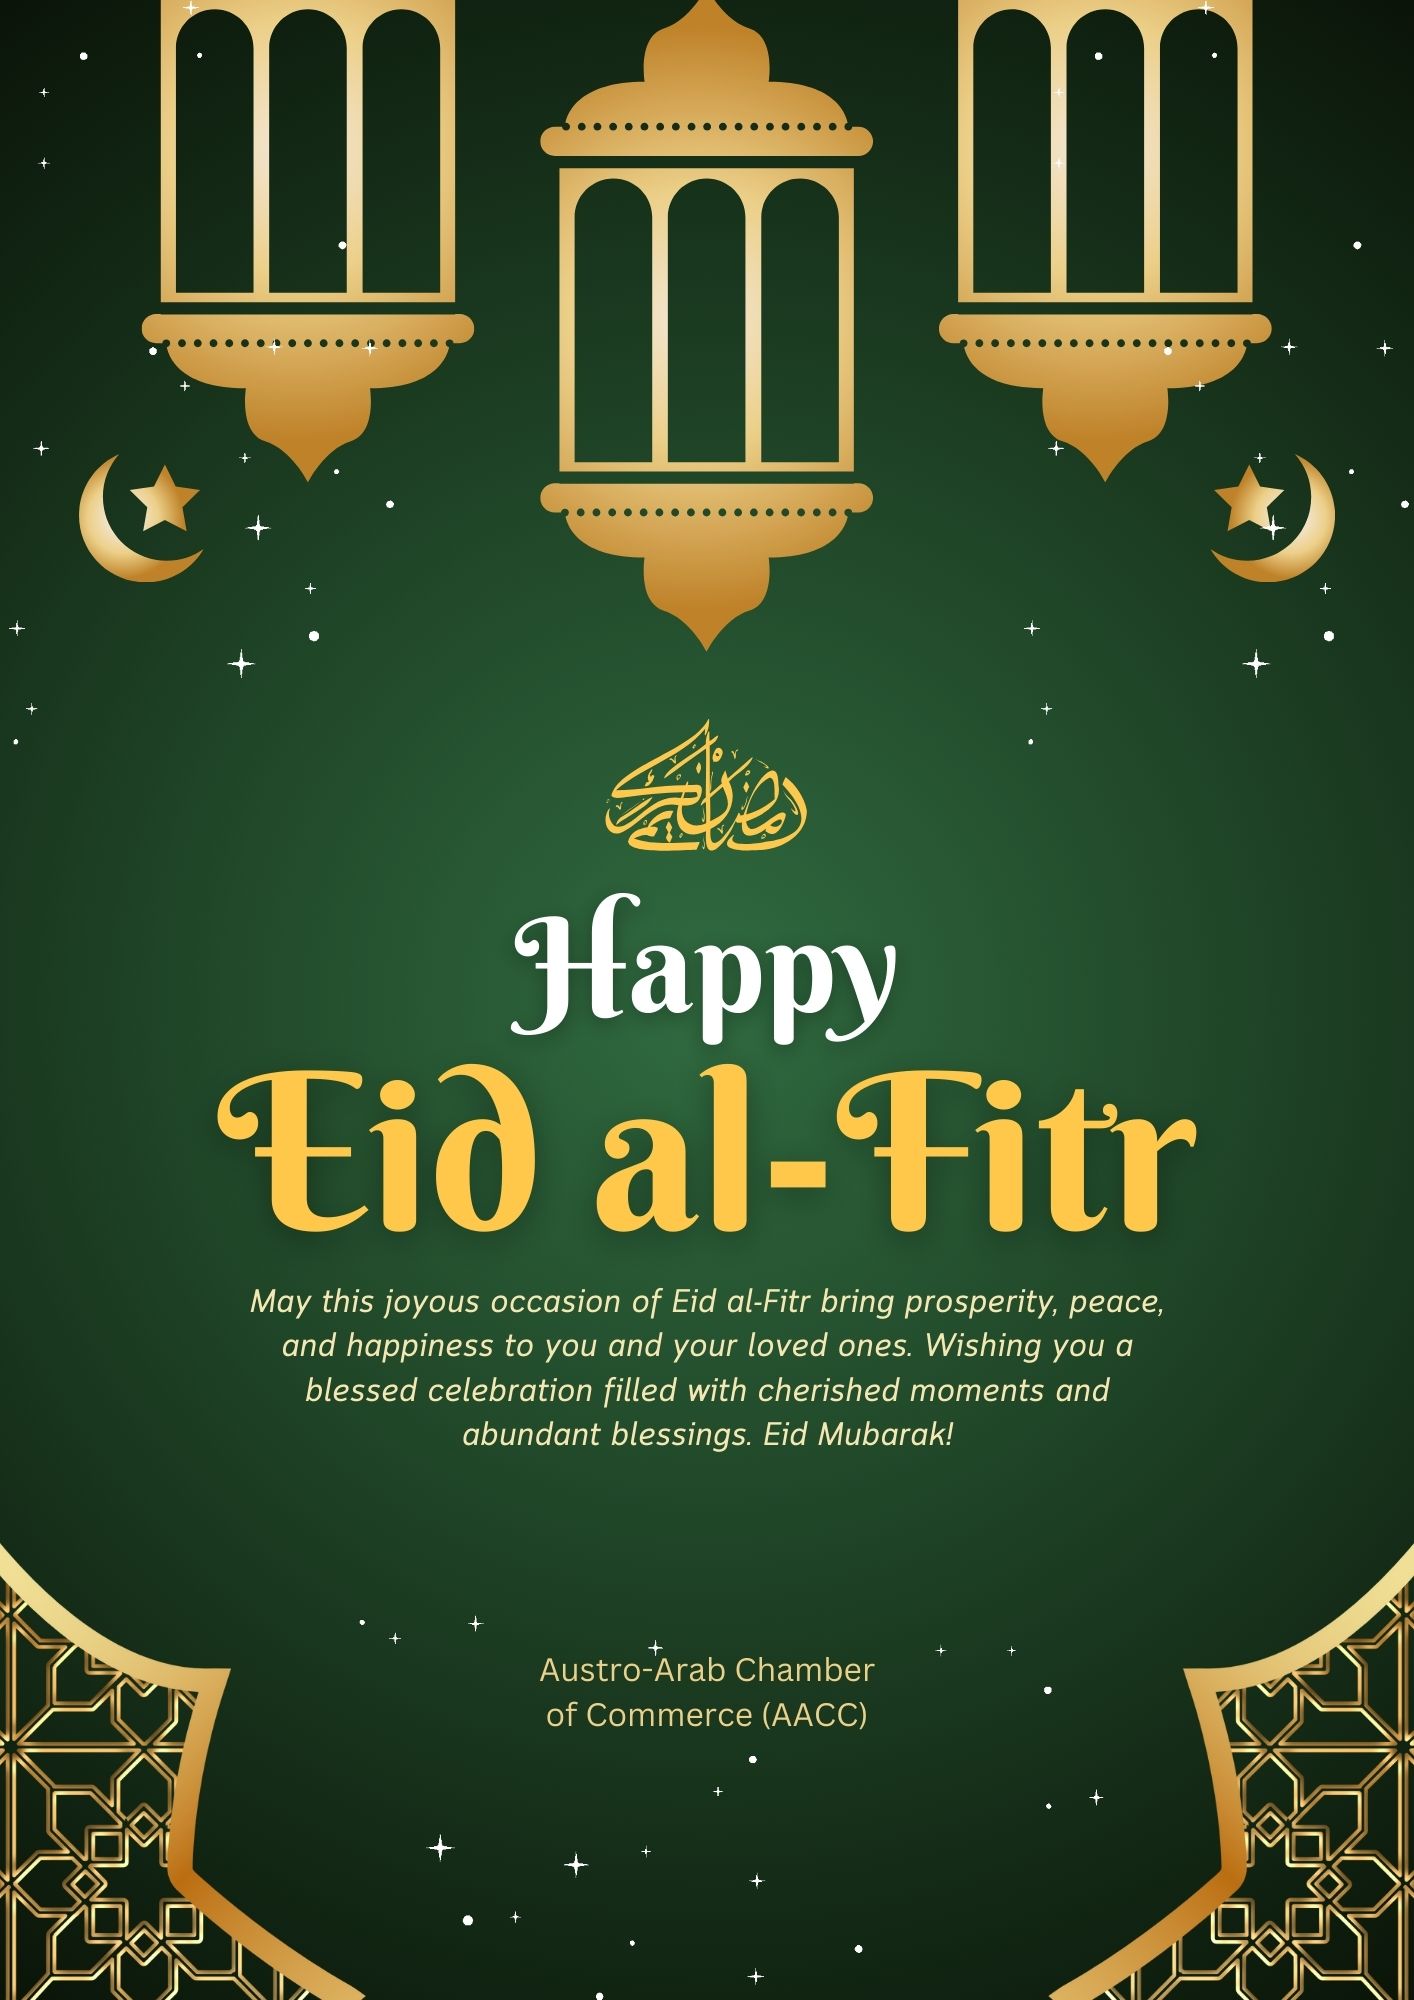 The Austro-Arab Chamber of Commerce wishes you a happy Eid al-Fitr